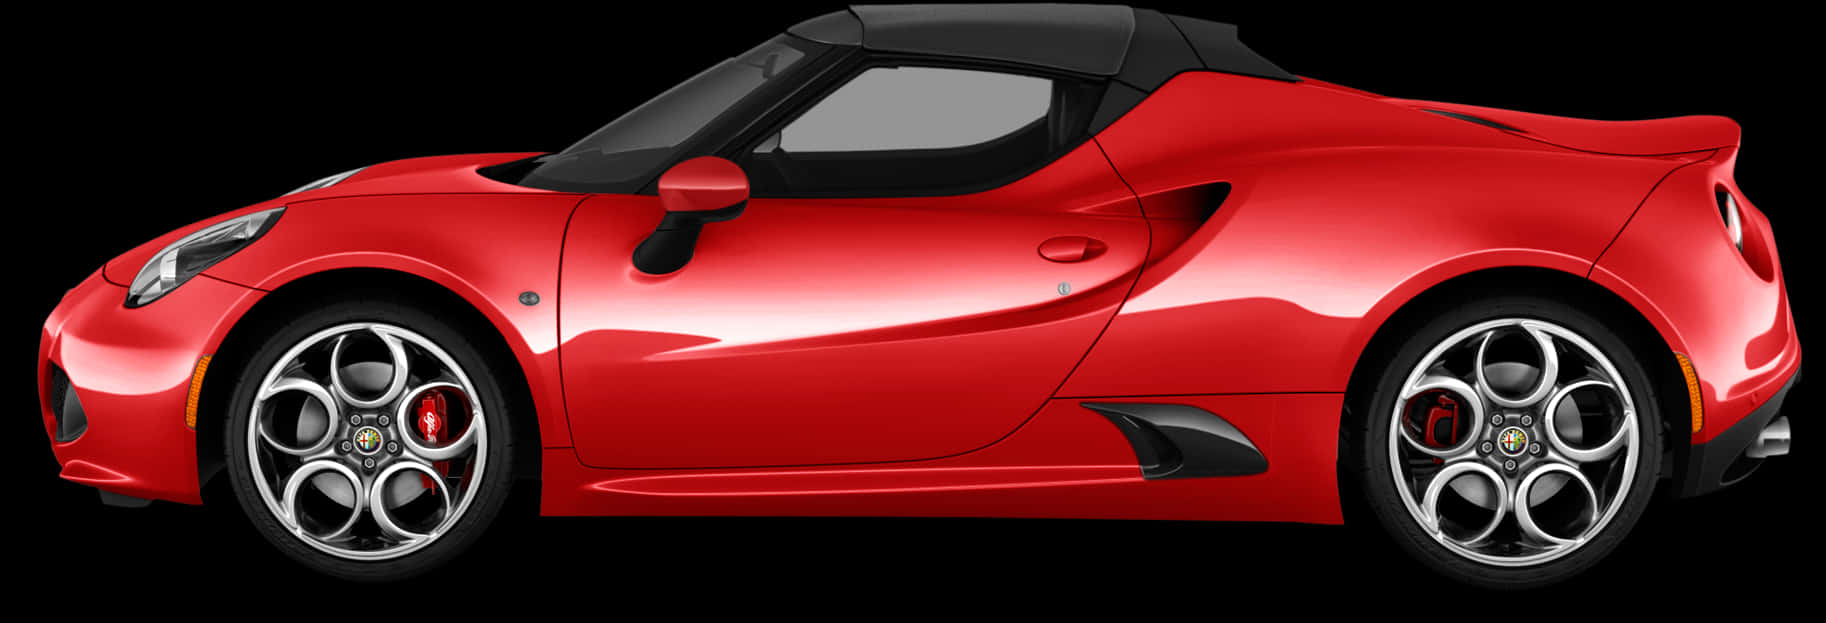 Red Sports Car Side View